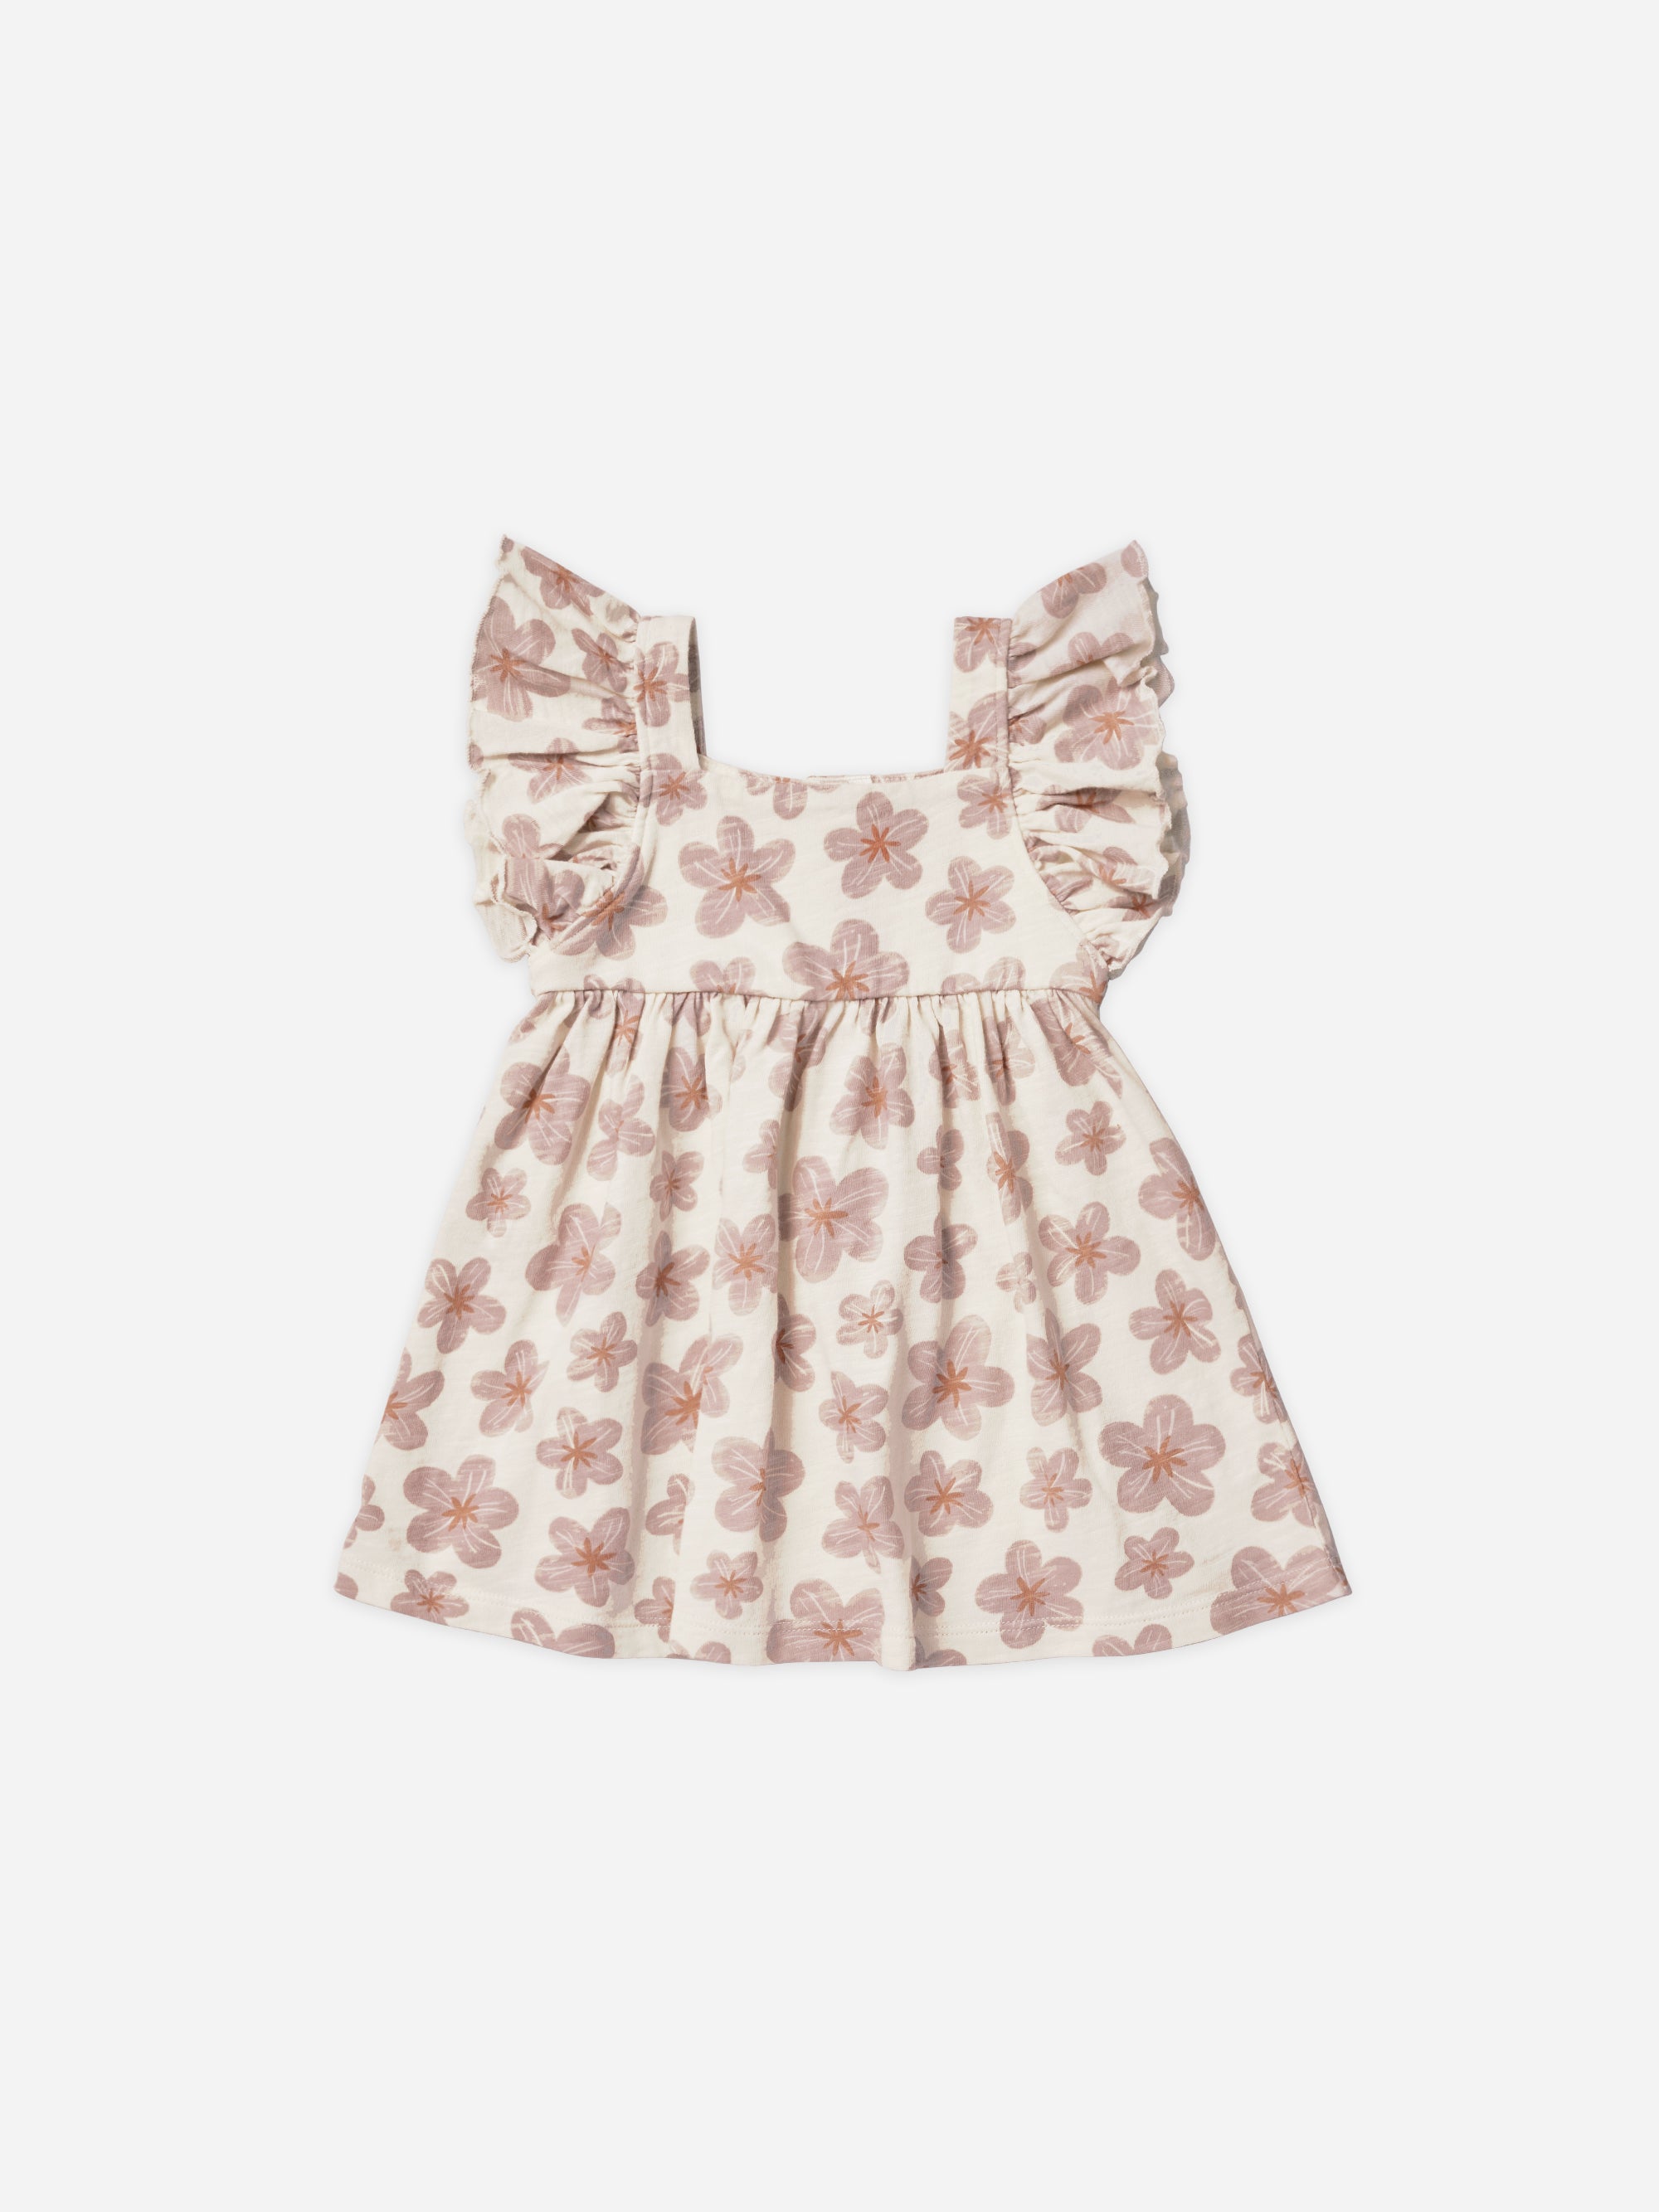 Mariposa Dress || Hibiscus - Rylee + Cru | Kids Clothes | Trendy Baby Clothes | Modern Infant Outfits |